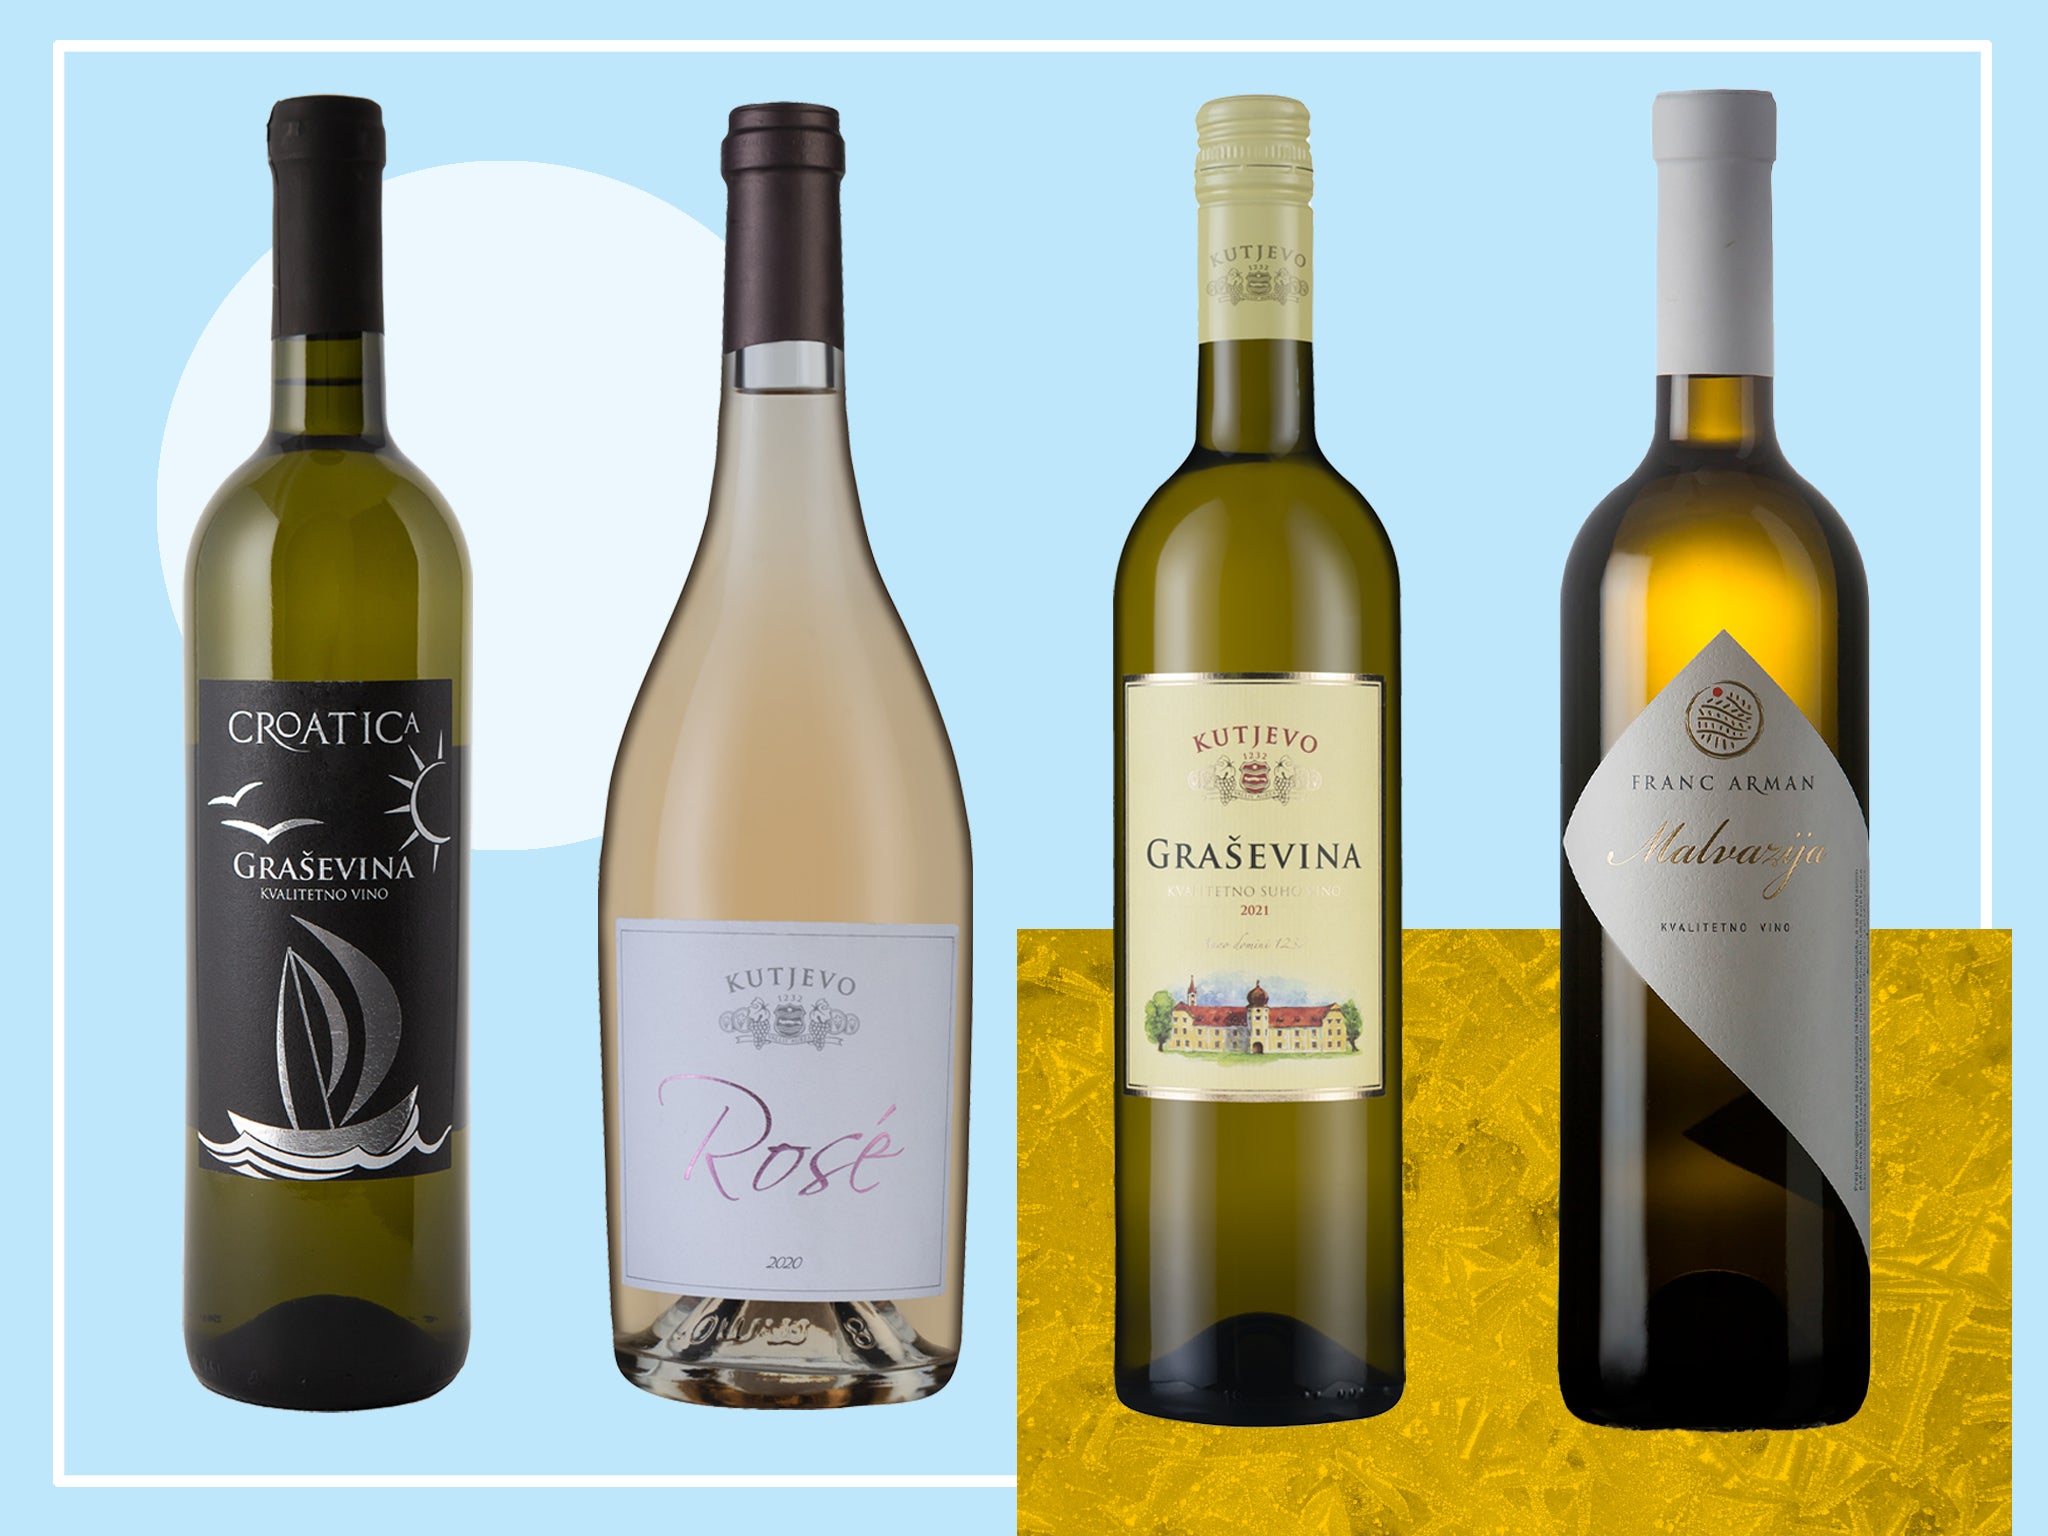 As an aperitif (with or without snacks) these vinos were a superb sip